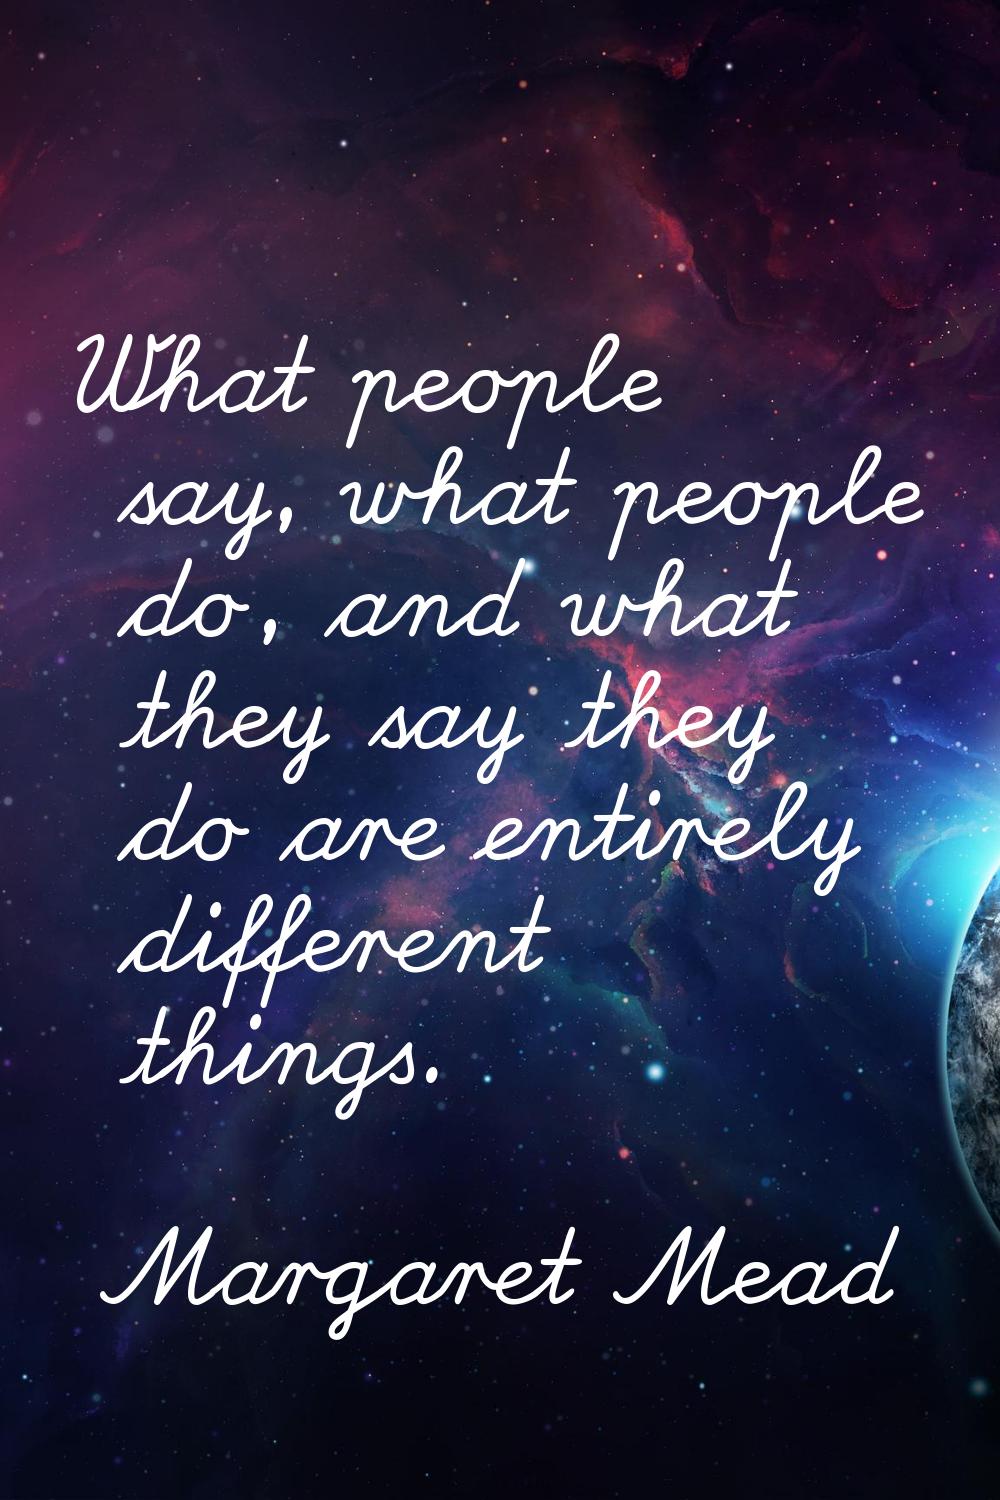 What people say, what people do, and what they say they do are entirely different things.